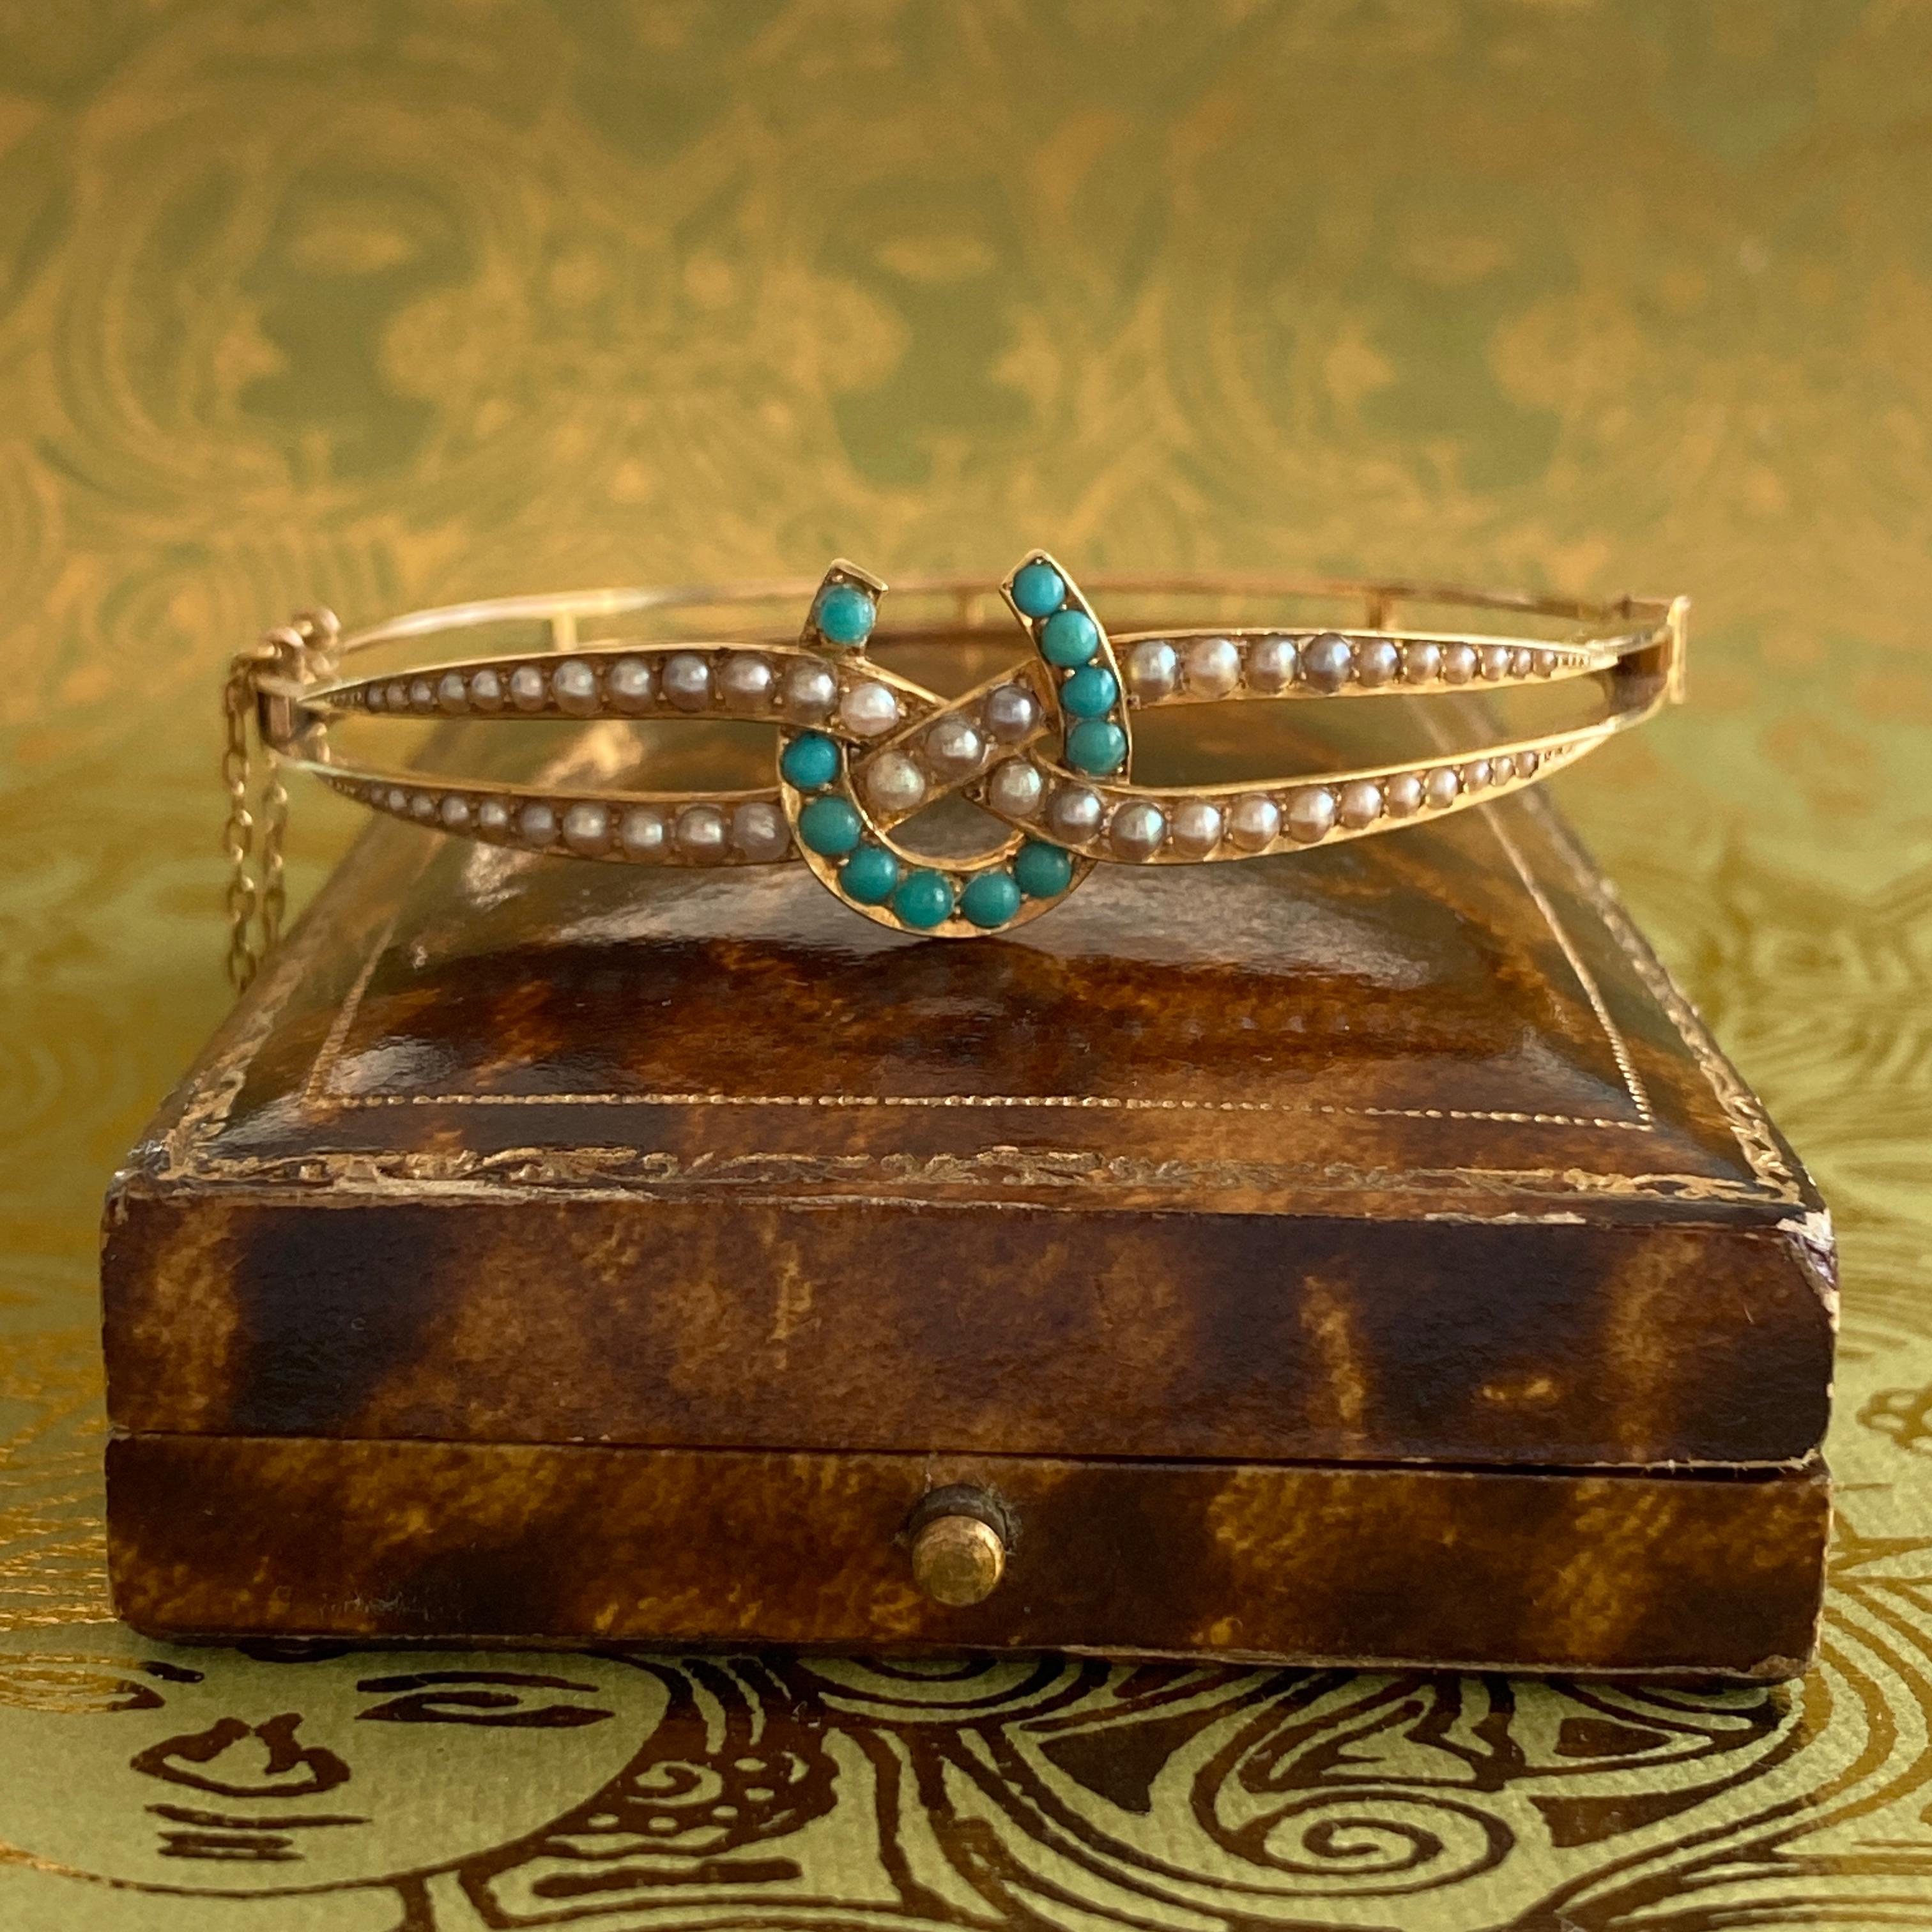 Details:
Sweet Victorian equestrian themed horseshoe bracelet in 14K yellow gold. Lovely delicate pearl and turquoise pattern along the front, with the horseshoe adorned with turquoise and the surrounding bracelet dotted with seed pearls. It has a